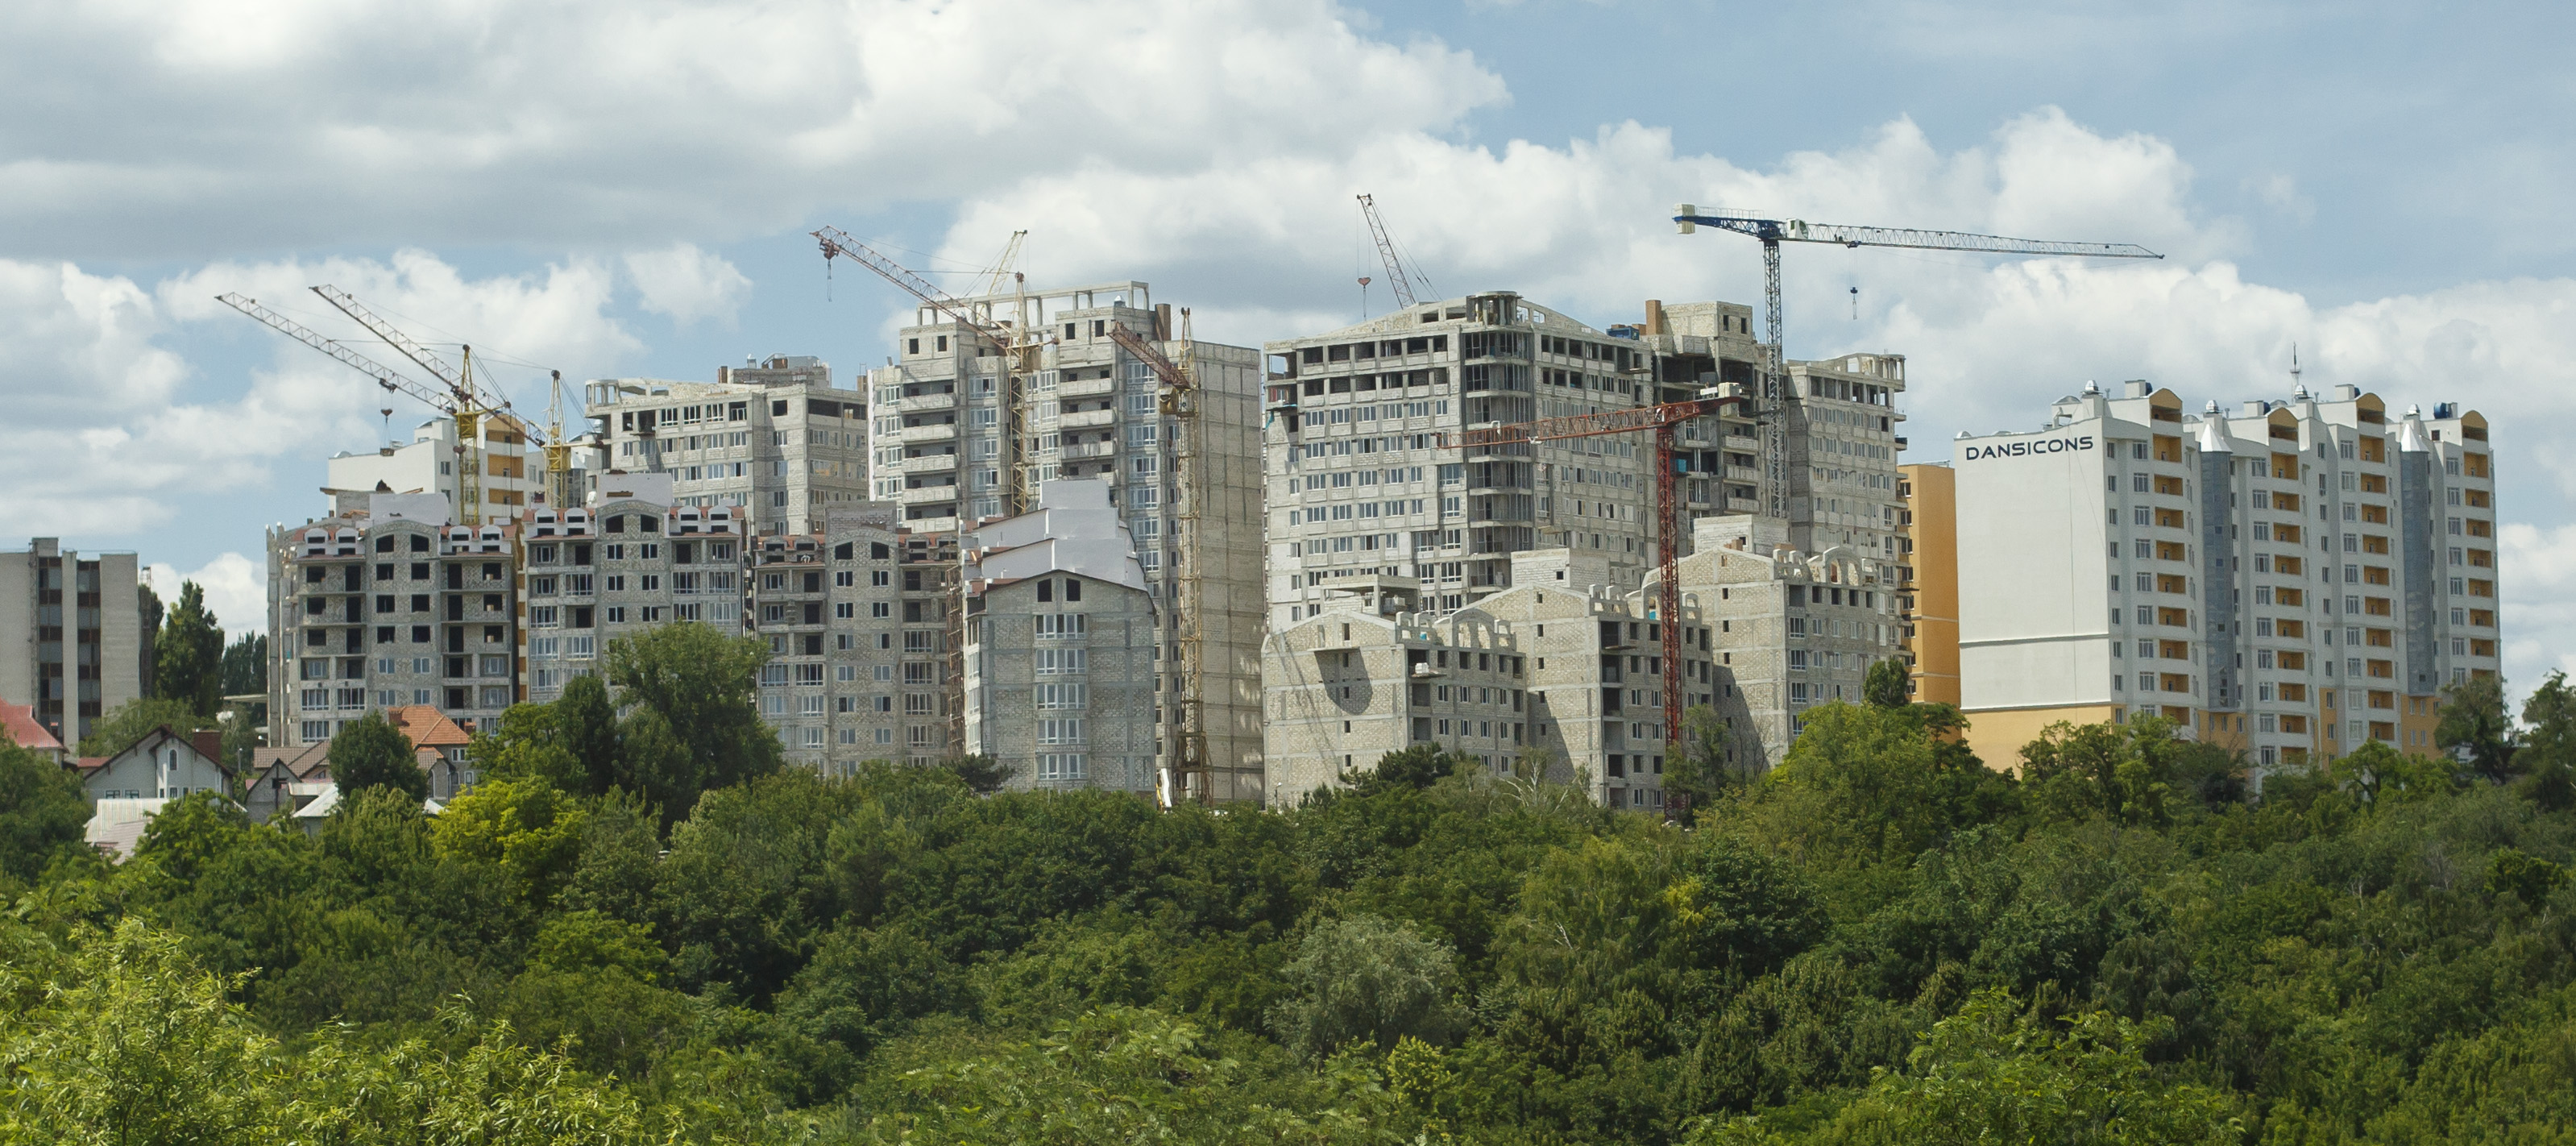 Construction work on the outskirts of Chisinau